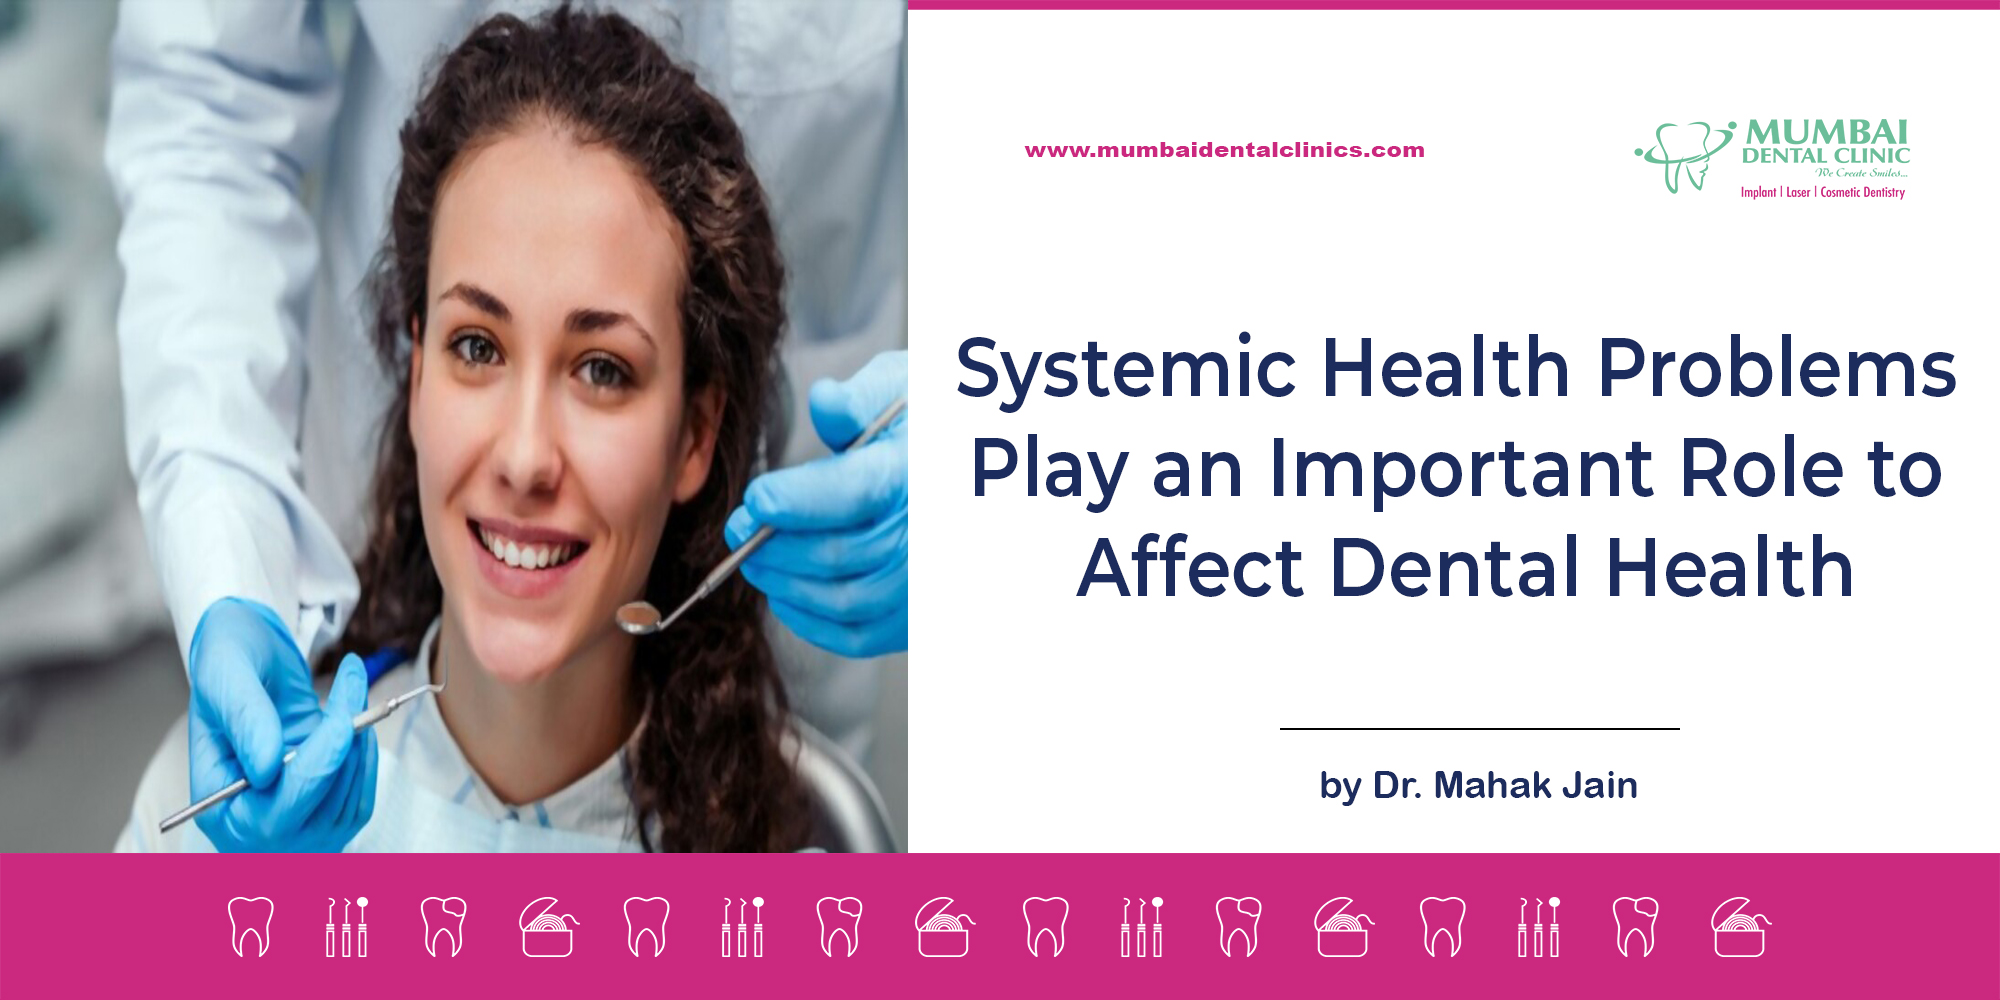 Dental treatment Services in Udaipur,best pediatric dentistry in udaipur,best dentist in udaipur,Braces specialist in Udaipur,Braces doctor in Udaipur, Root canal treatment in udaipur, Dental Implants doctor in udaipur